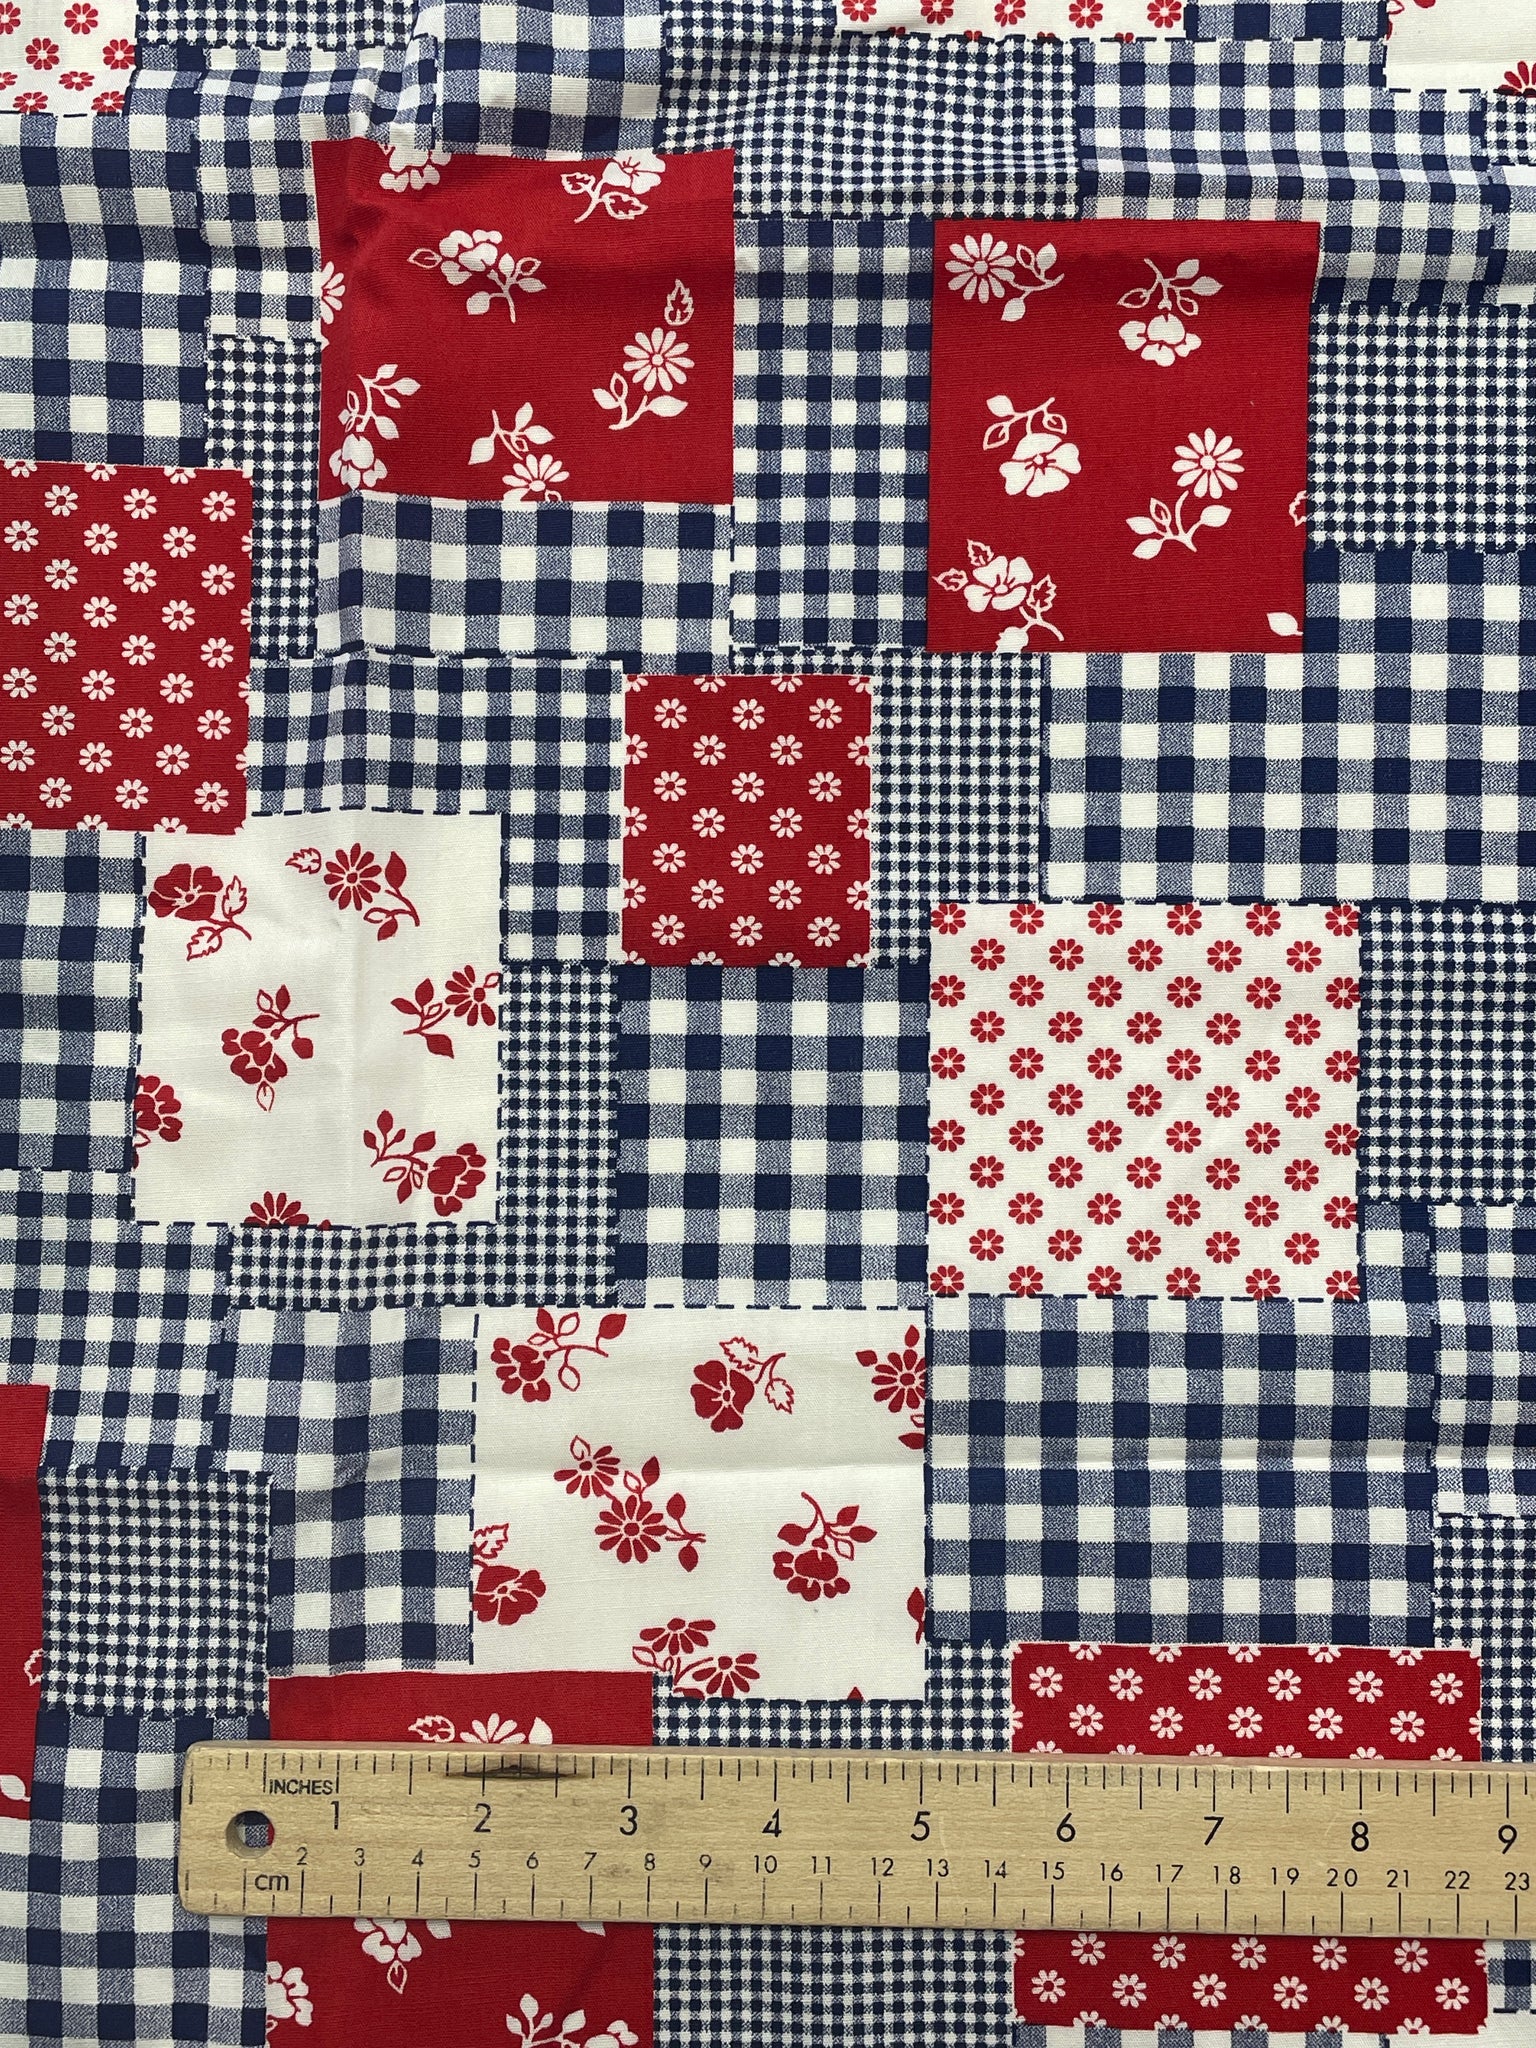 7/8 YD Cotton Patchwork Print Remnant - Red, White and Blue